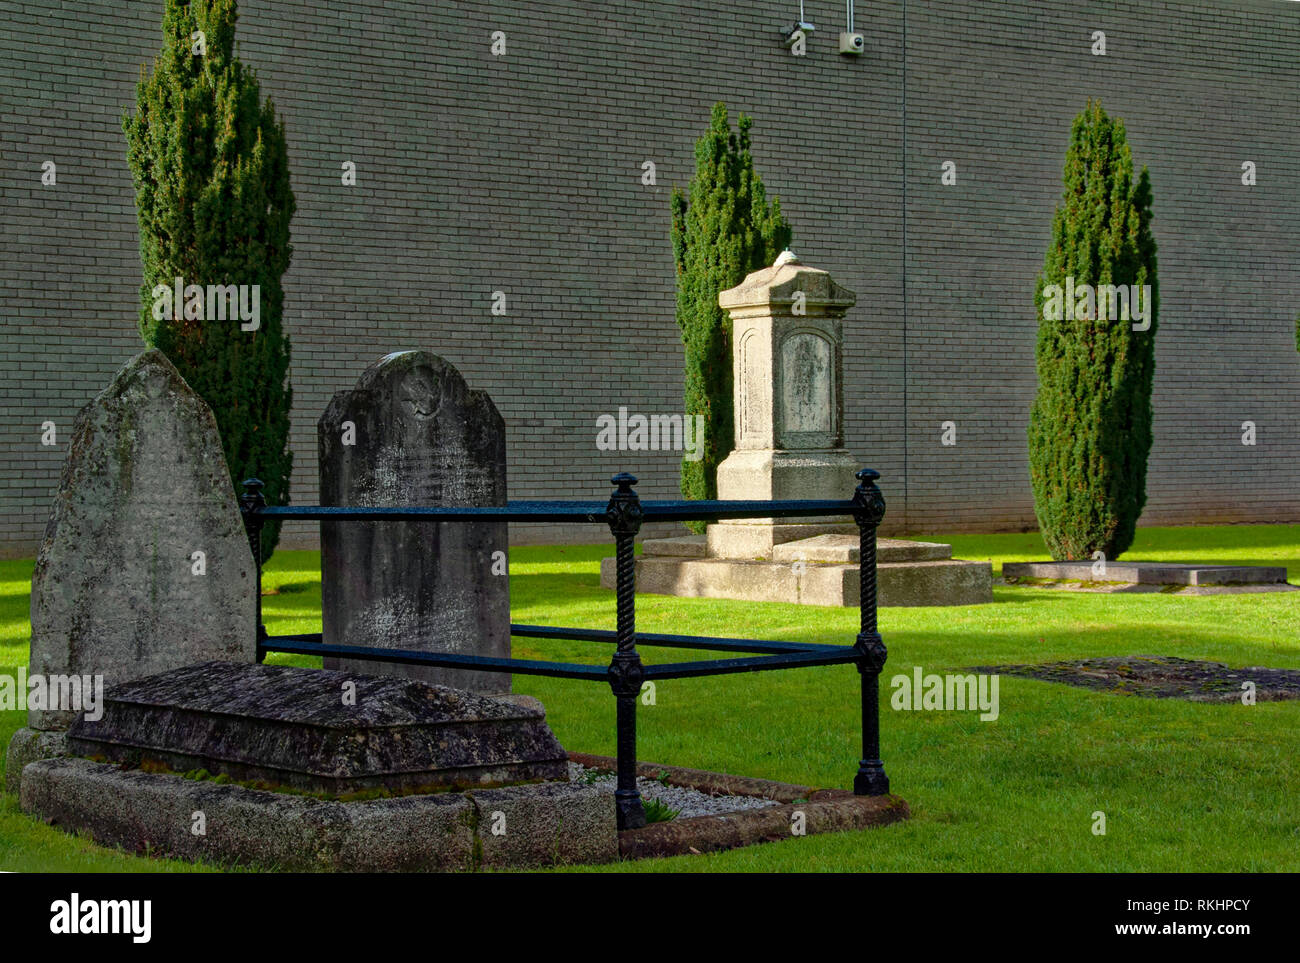 Arbour Hill,National Museum of Ireland.Graveyard includes the burial plot of the signatories of the Easter Proclamation that began the 1916 Rising. Stock Photo